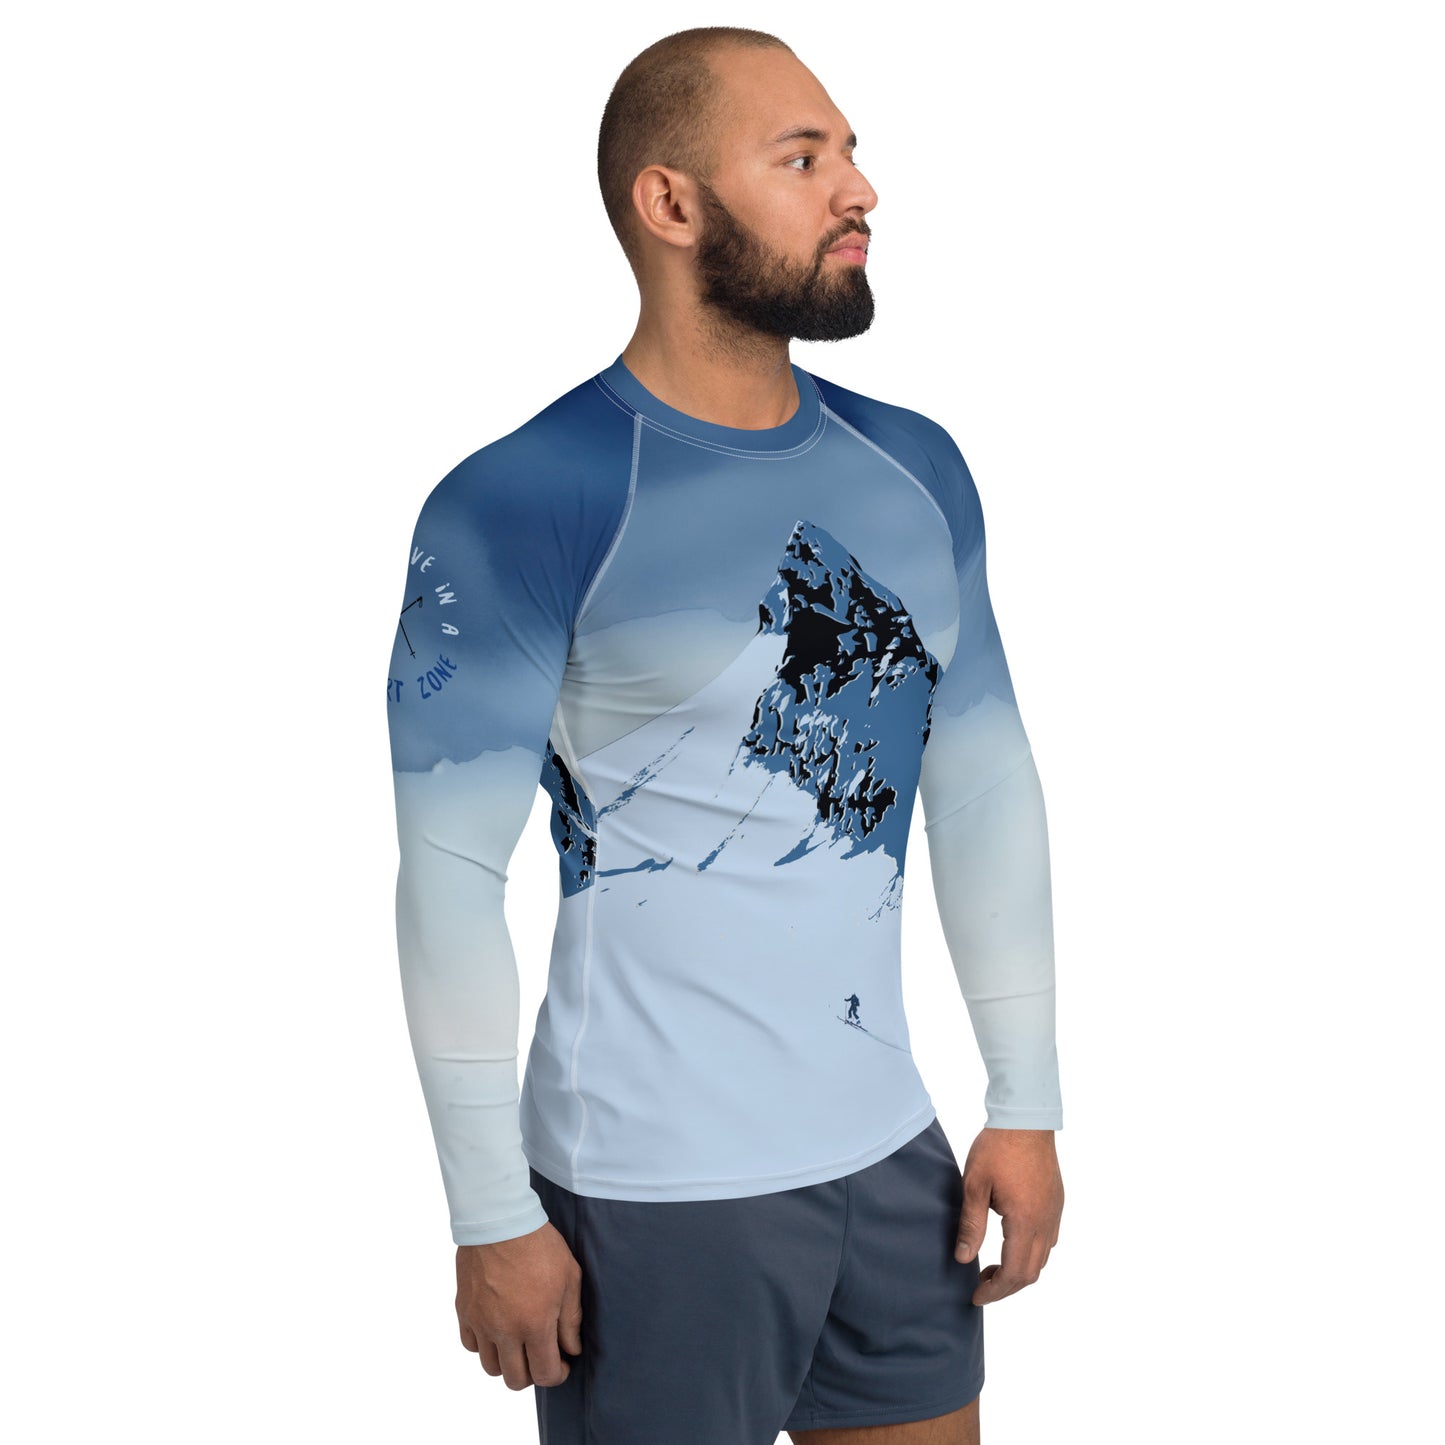 The King - Dont live in a comfort zone baselayer men